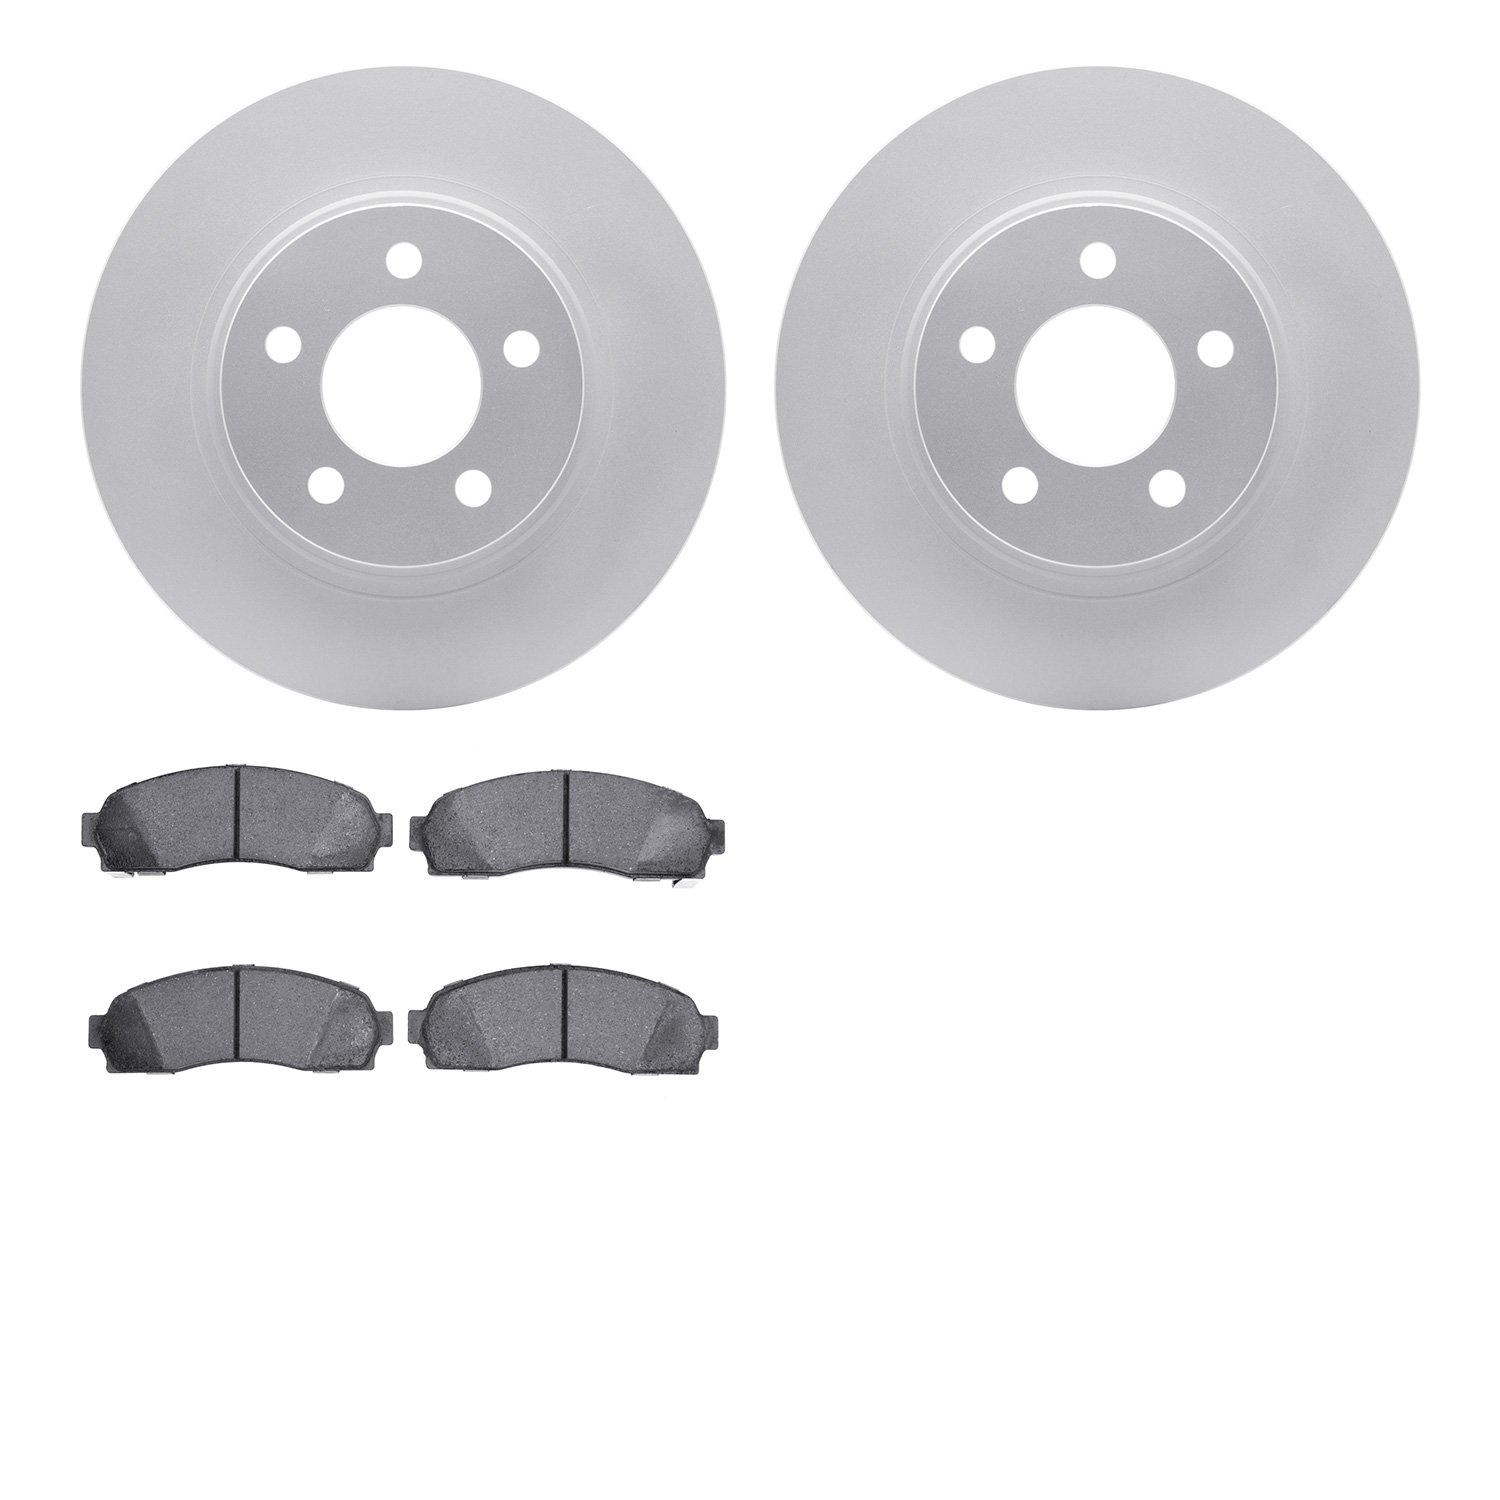 4402-54033 Geospec Brake Rotors with Ultimate-Duty Brake Pads Kit, 2001-2011 Ford/Lincoln/Mercury/Mazda, Position: Front